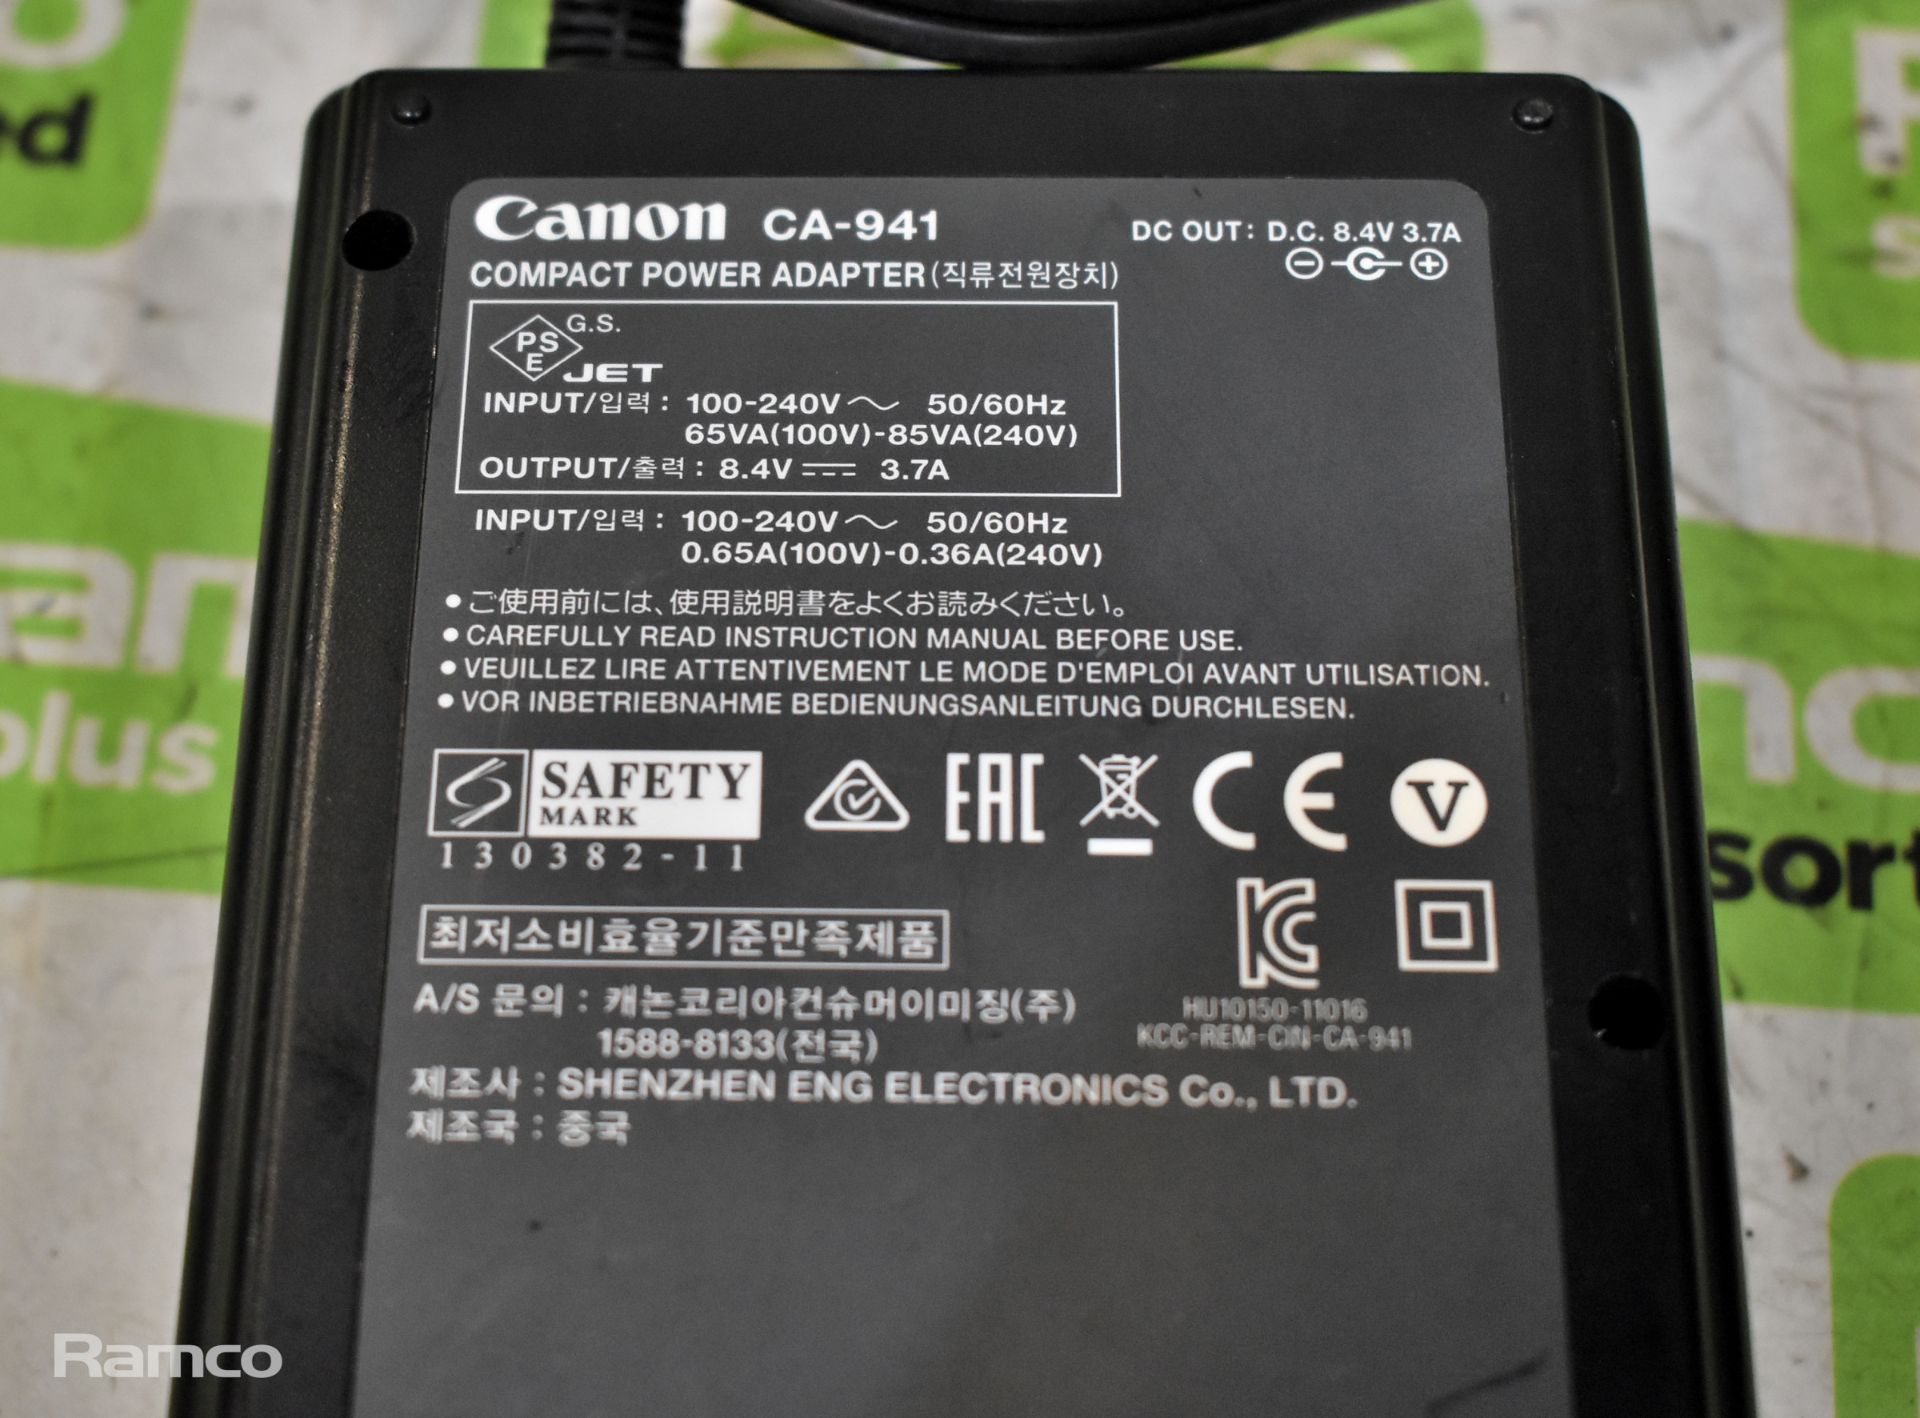 2x Canon CA-941 compact power adapters - Image 3 of 4